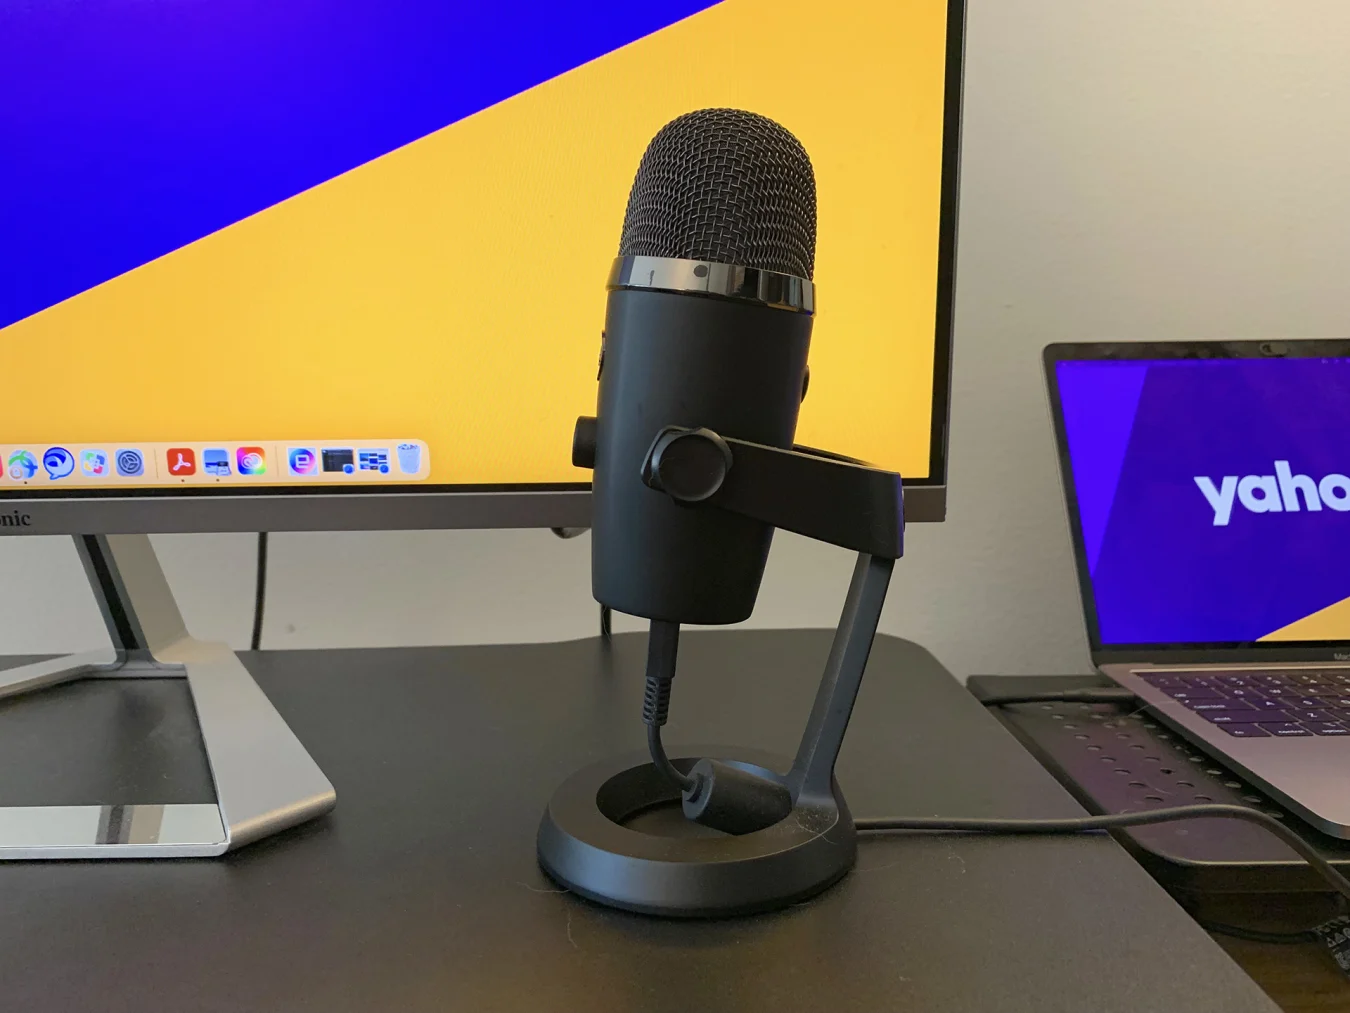 Blue Yeti Nano microphone on black desk stand in front of laptop and computer monitor.